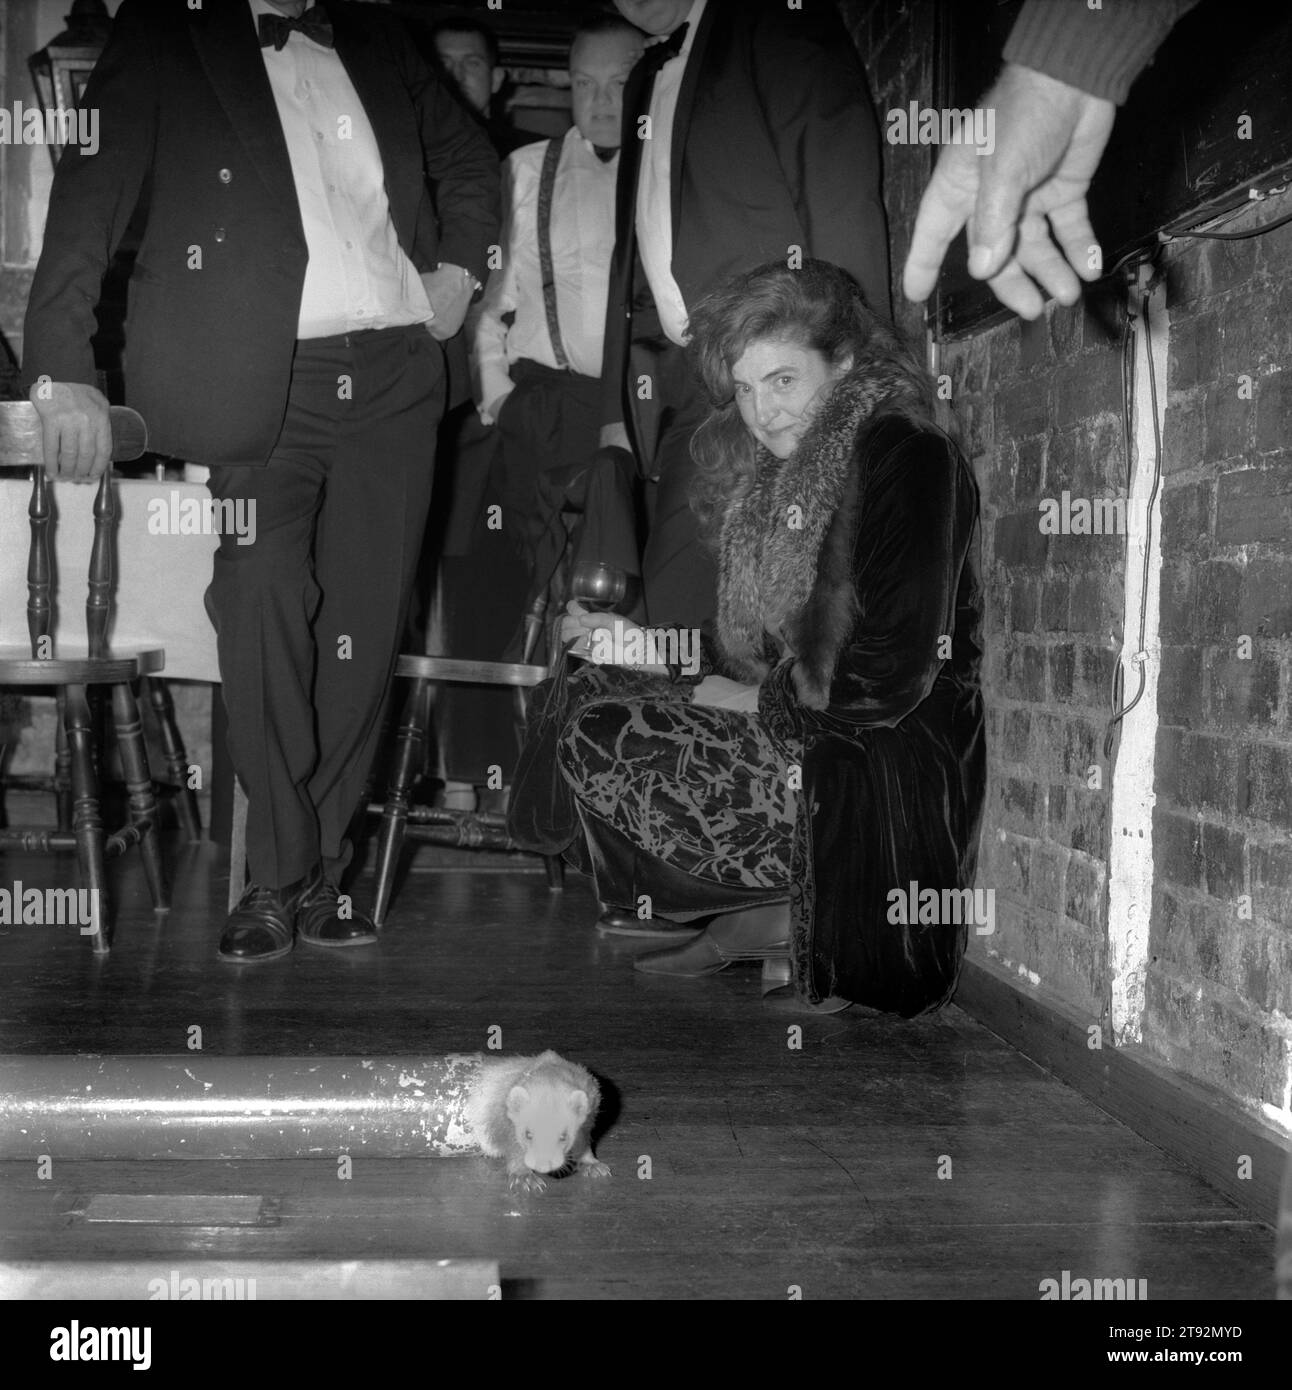 Ferret Racing Uk. Ferrets race through a long pipe, the first ferret out at the other end of the tube wins. The Valley Mink Hounds club evening get together in a Berkshire country pub. England UK 2000s 200s HOMER SYKES Stock Photo